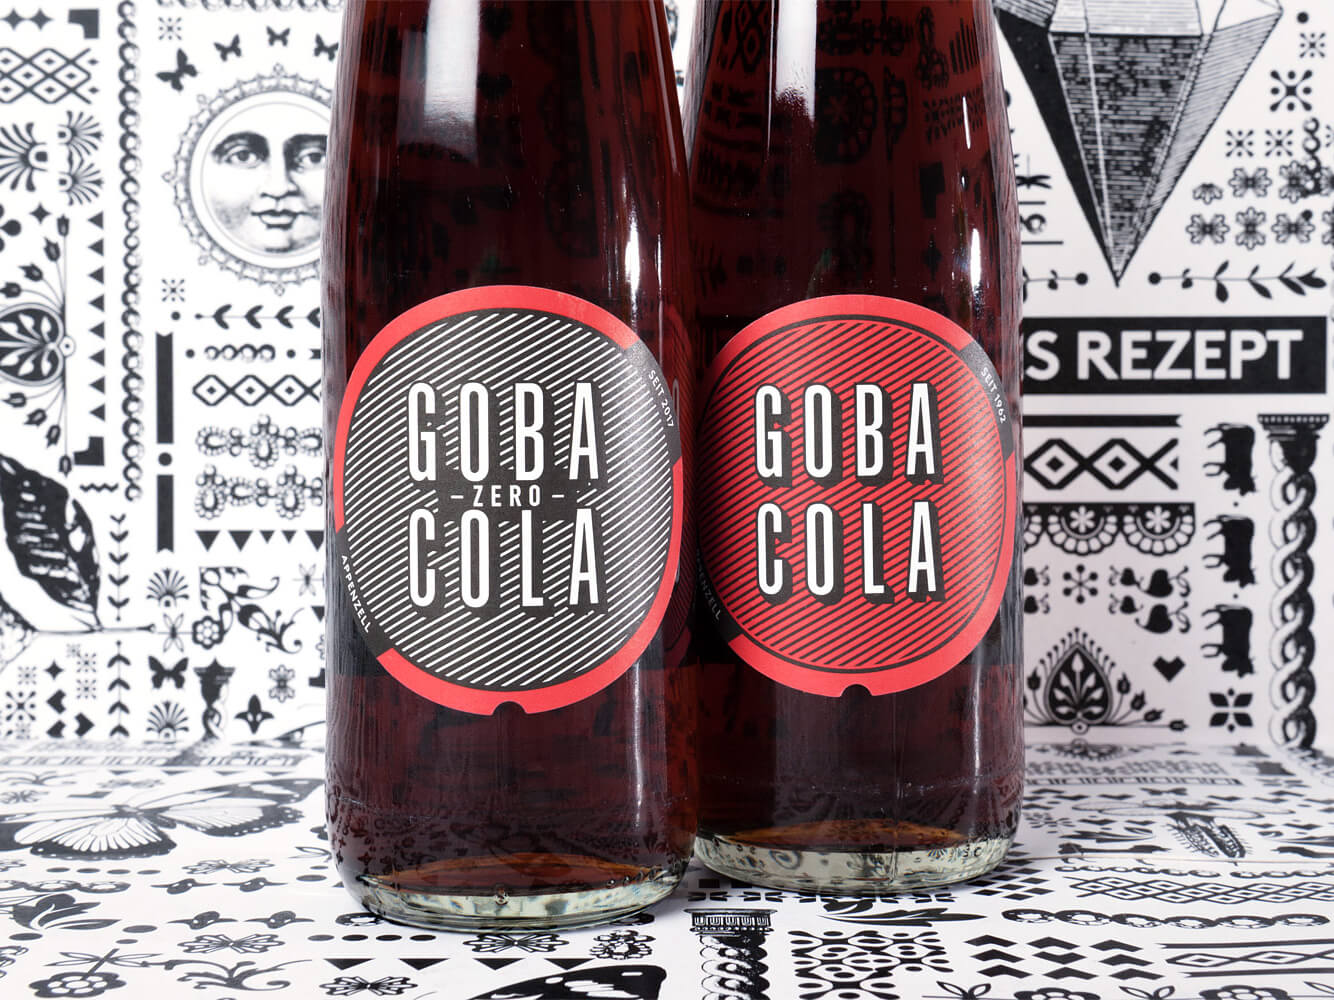 Goba Cola is a Swiss soda you must try